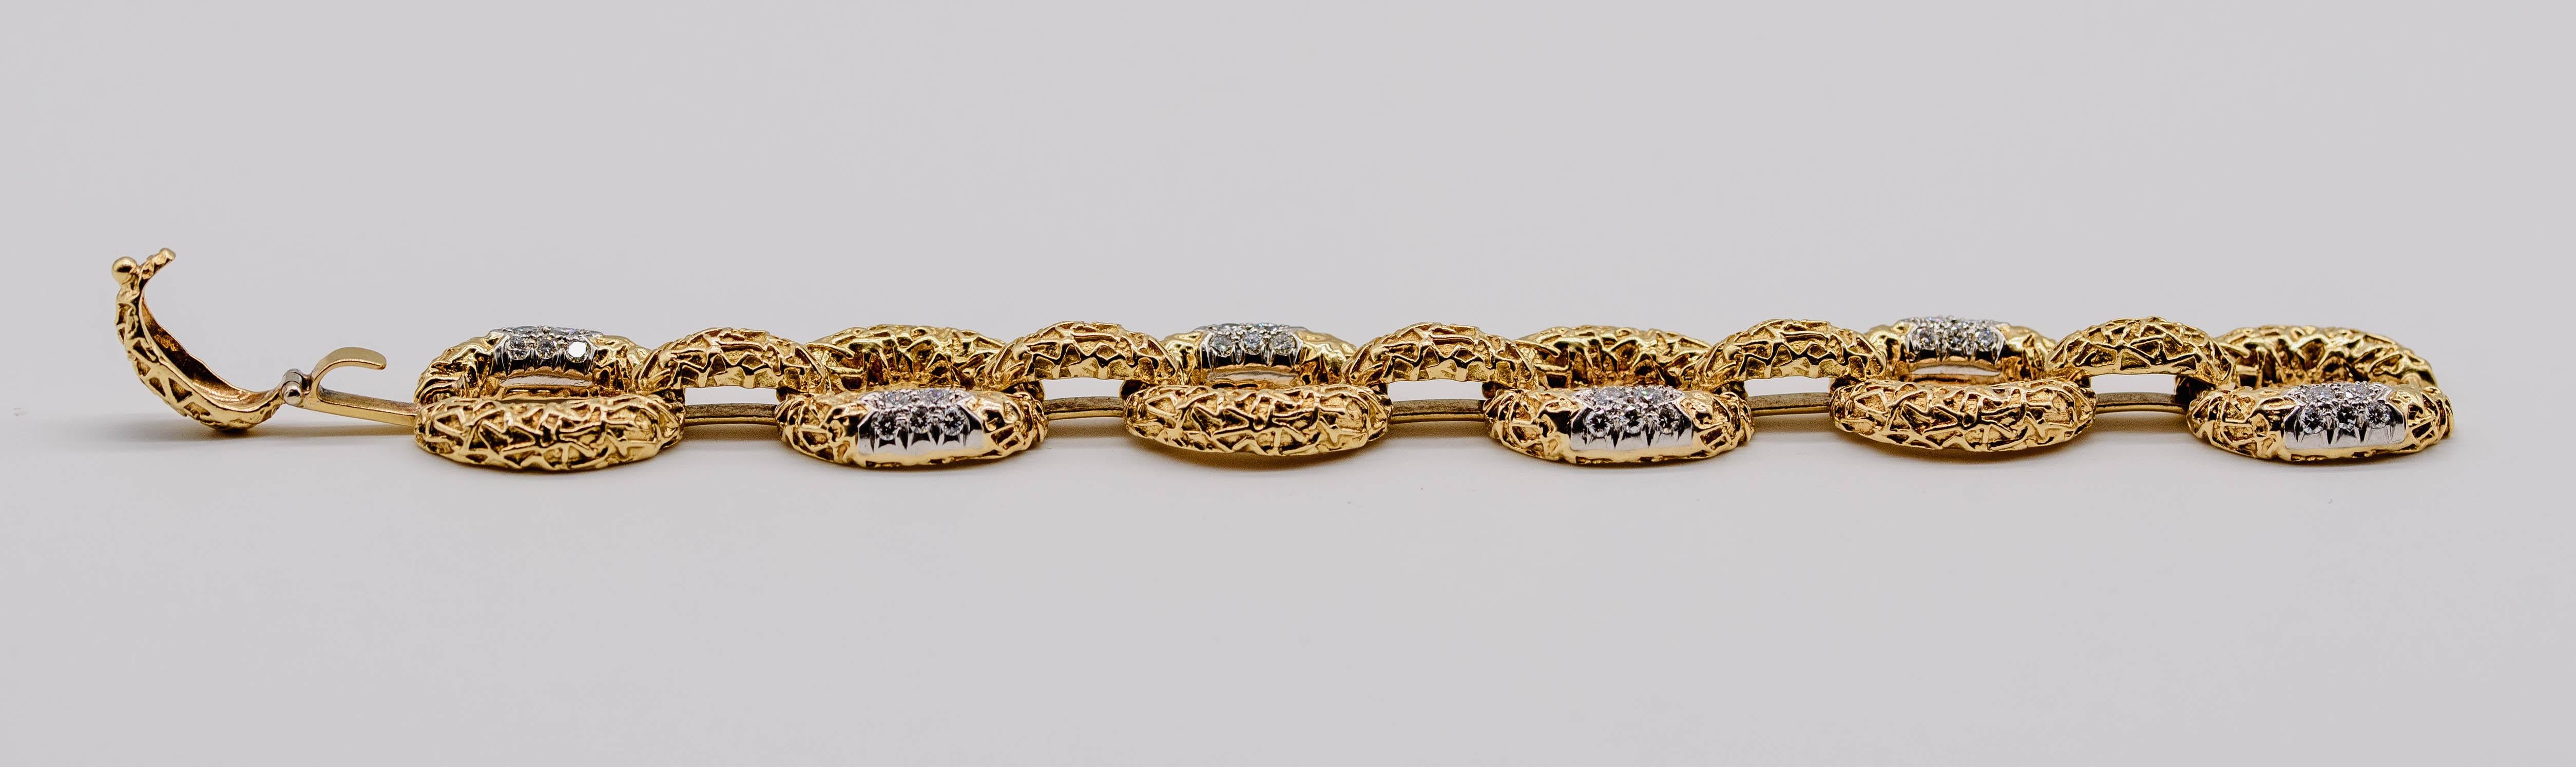 Van Cleef & Arpels Gold Diamond Bracelet In Good Condition For Sale In New York, NY